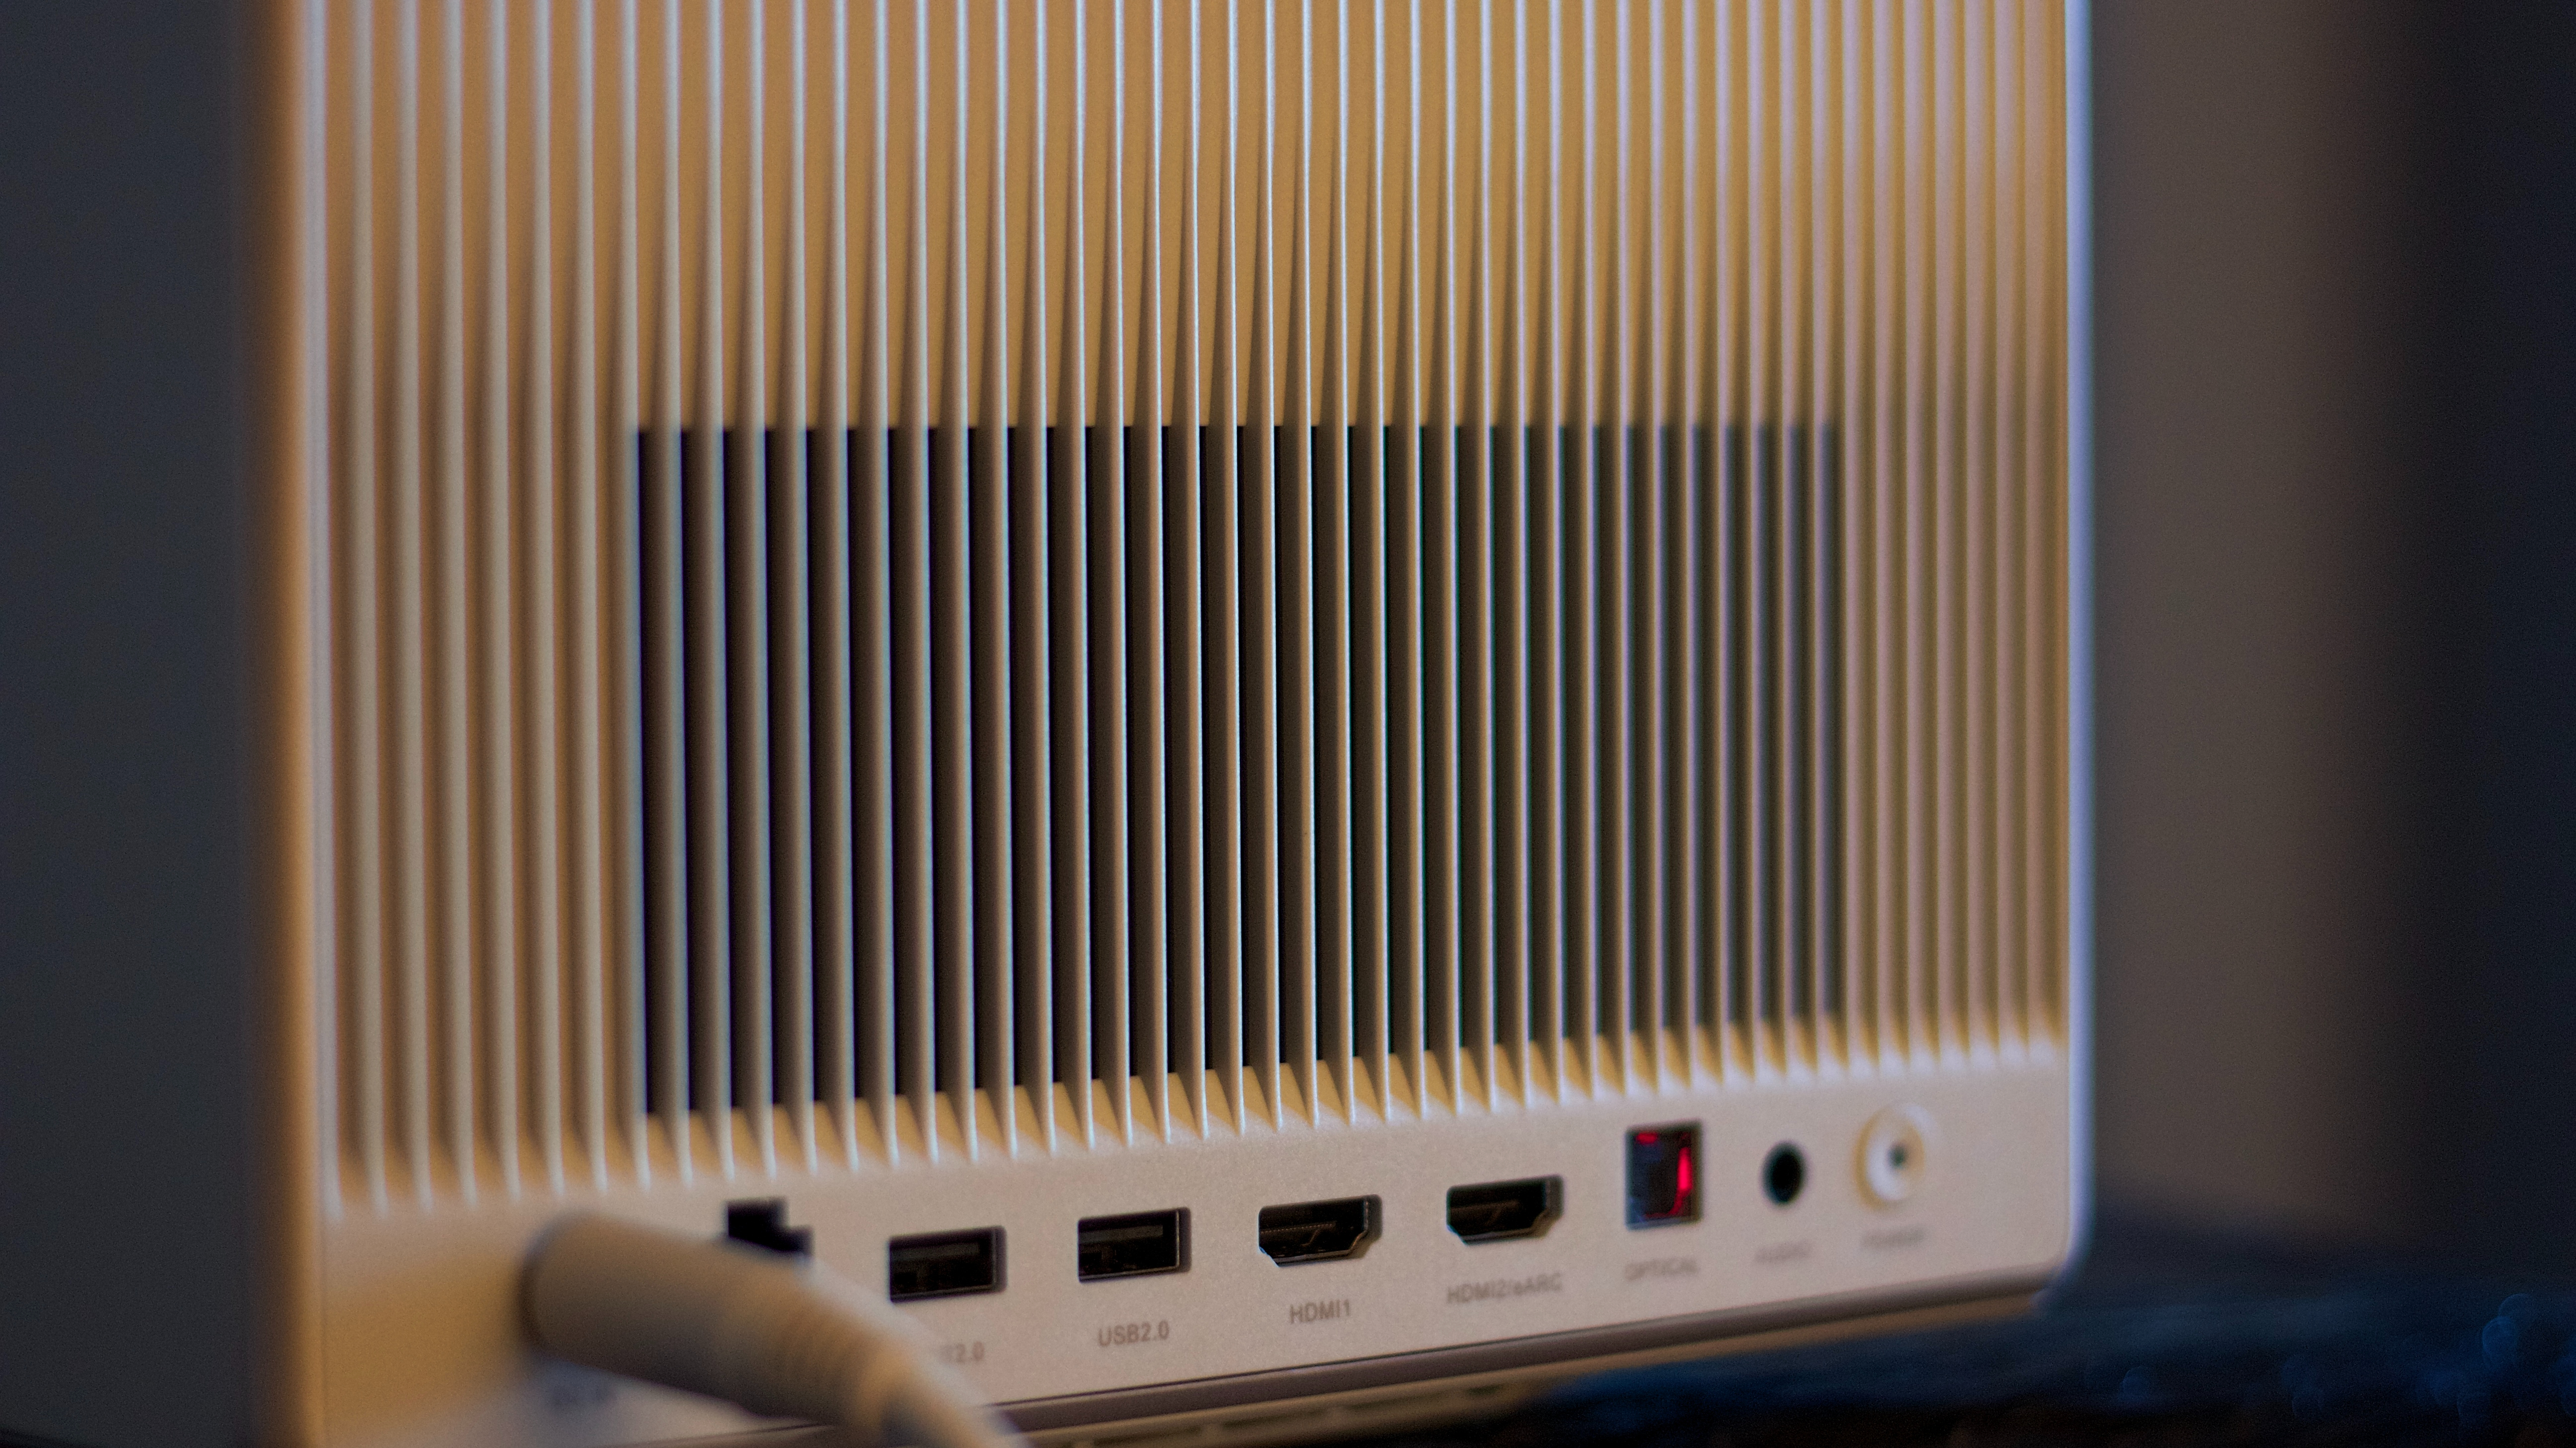 the back of a projector grille with various connectivity ports